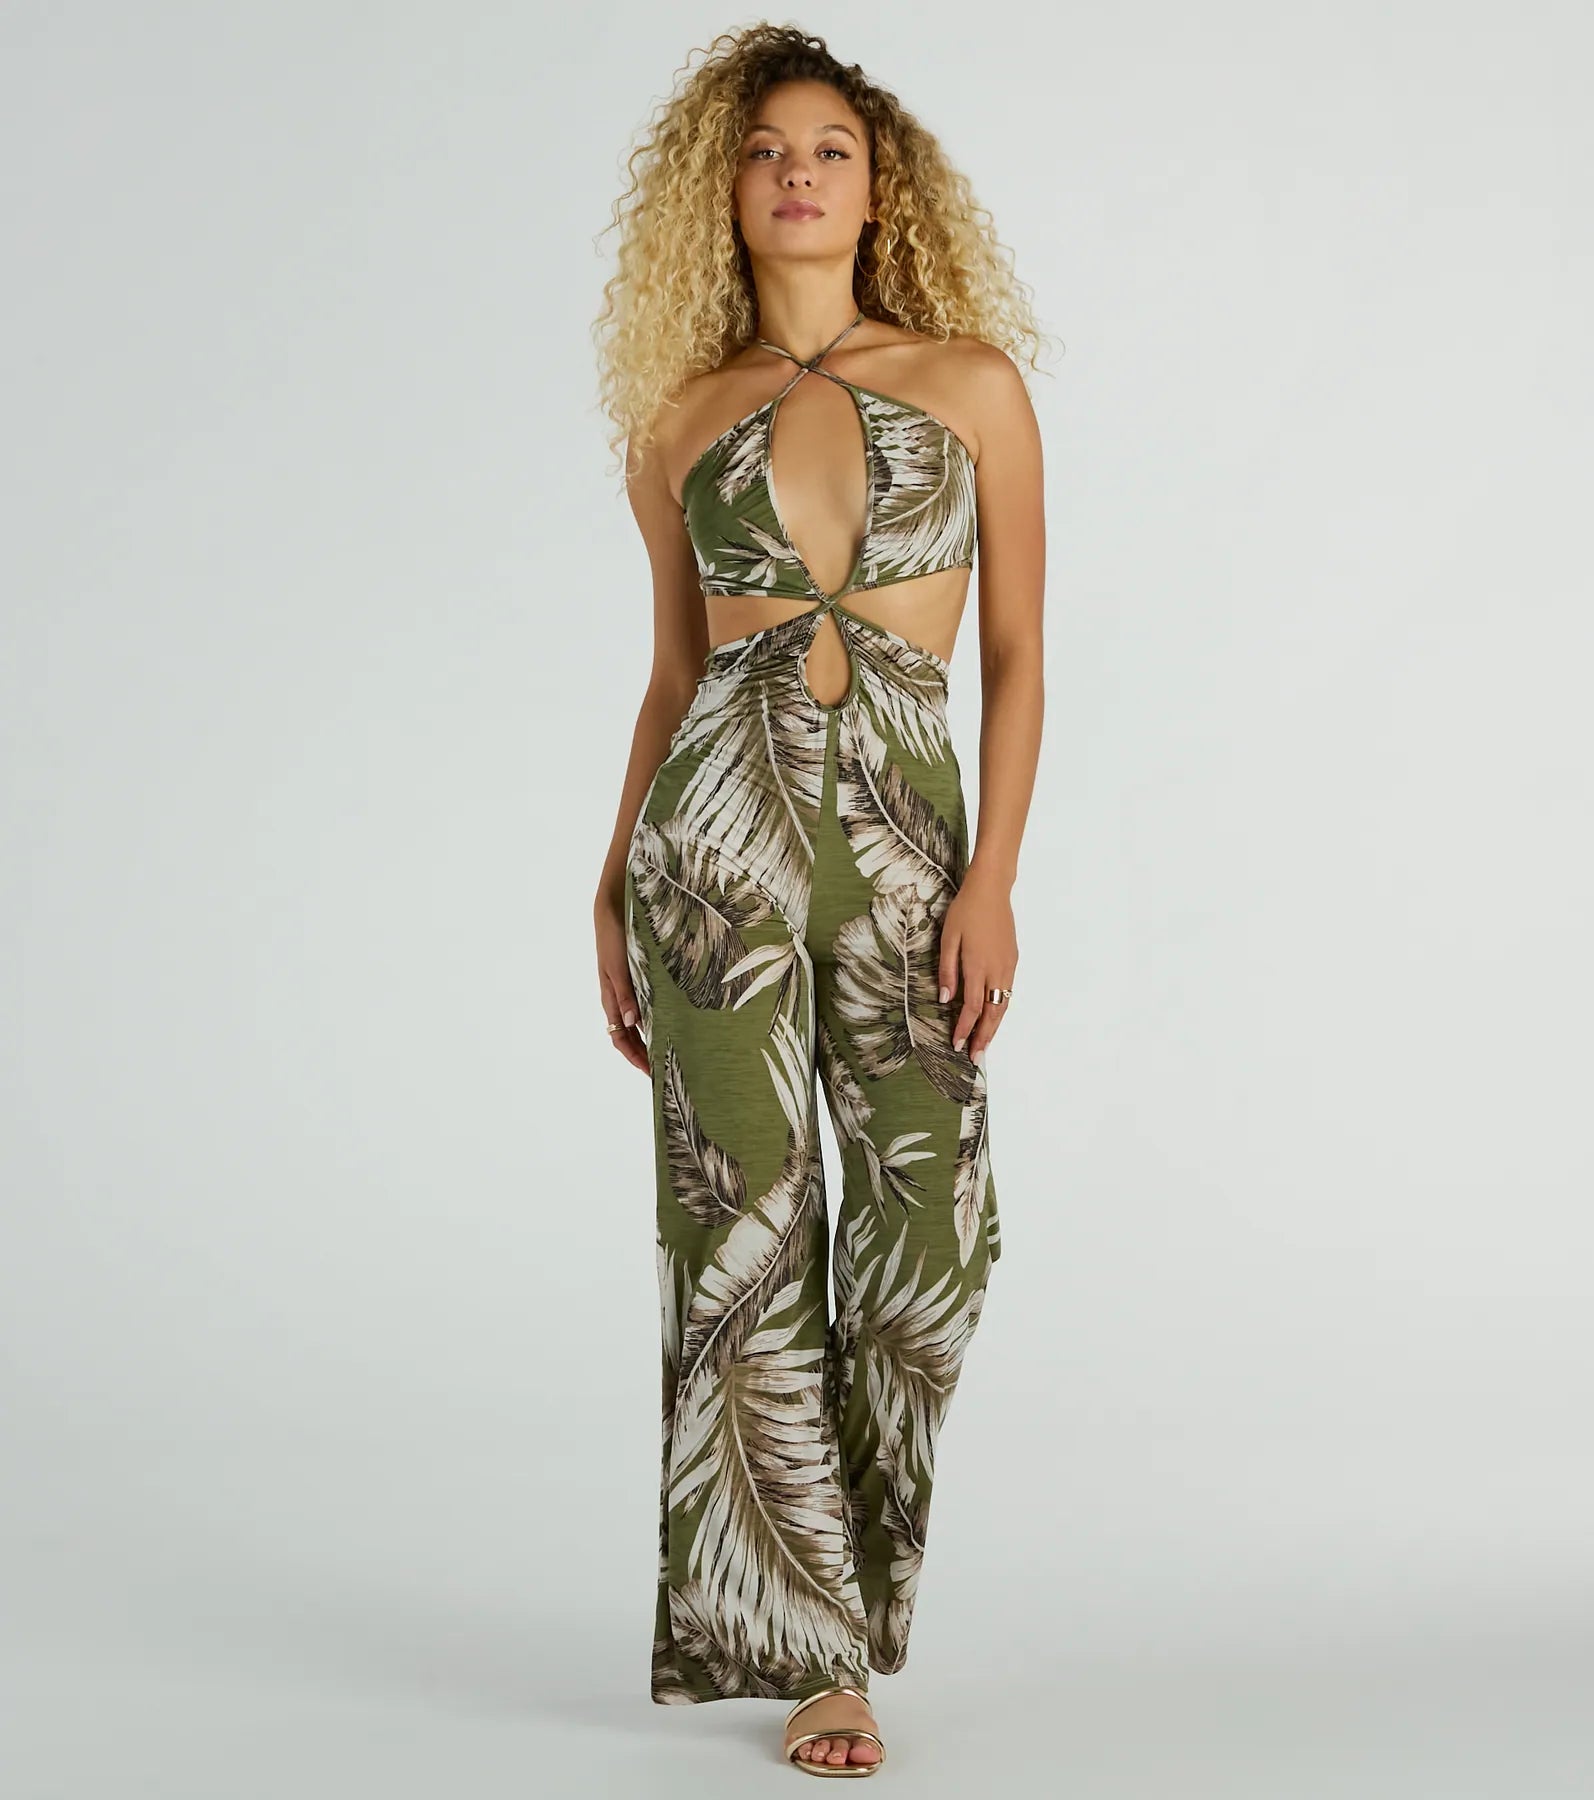 Sexy Knit Tropical Print Halter Plunging Neck Sleeveless Spaghetti Strap Stretchy Cutout Open-Back Jumpsuit